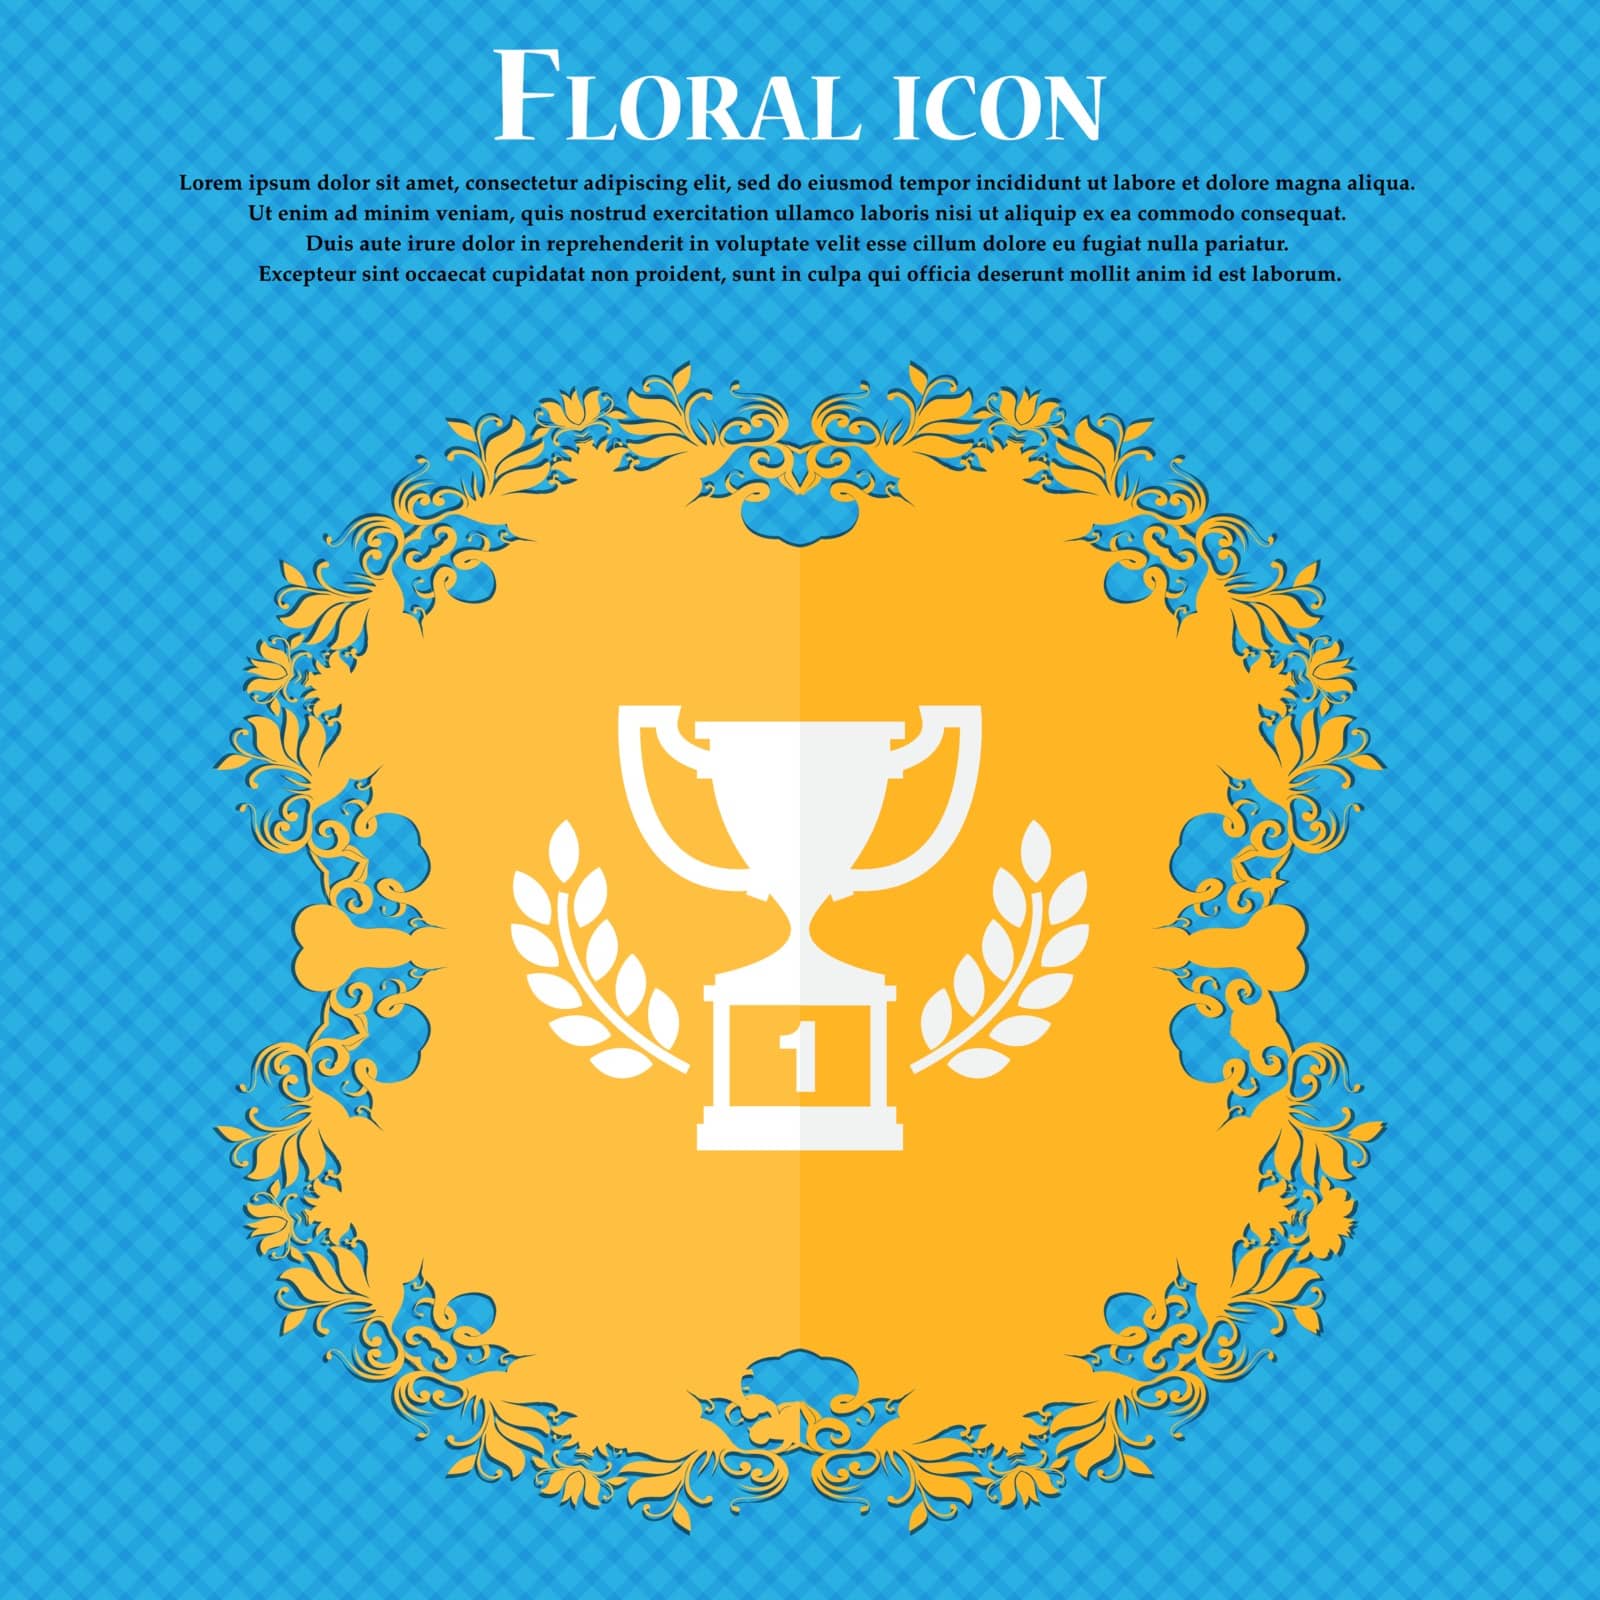 Champions cup, Trophy icon. Floral flat design on a blue abstract background with place for your text. Vector illustration